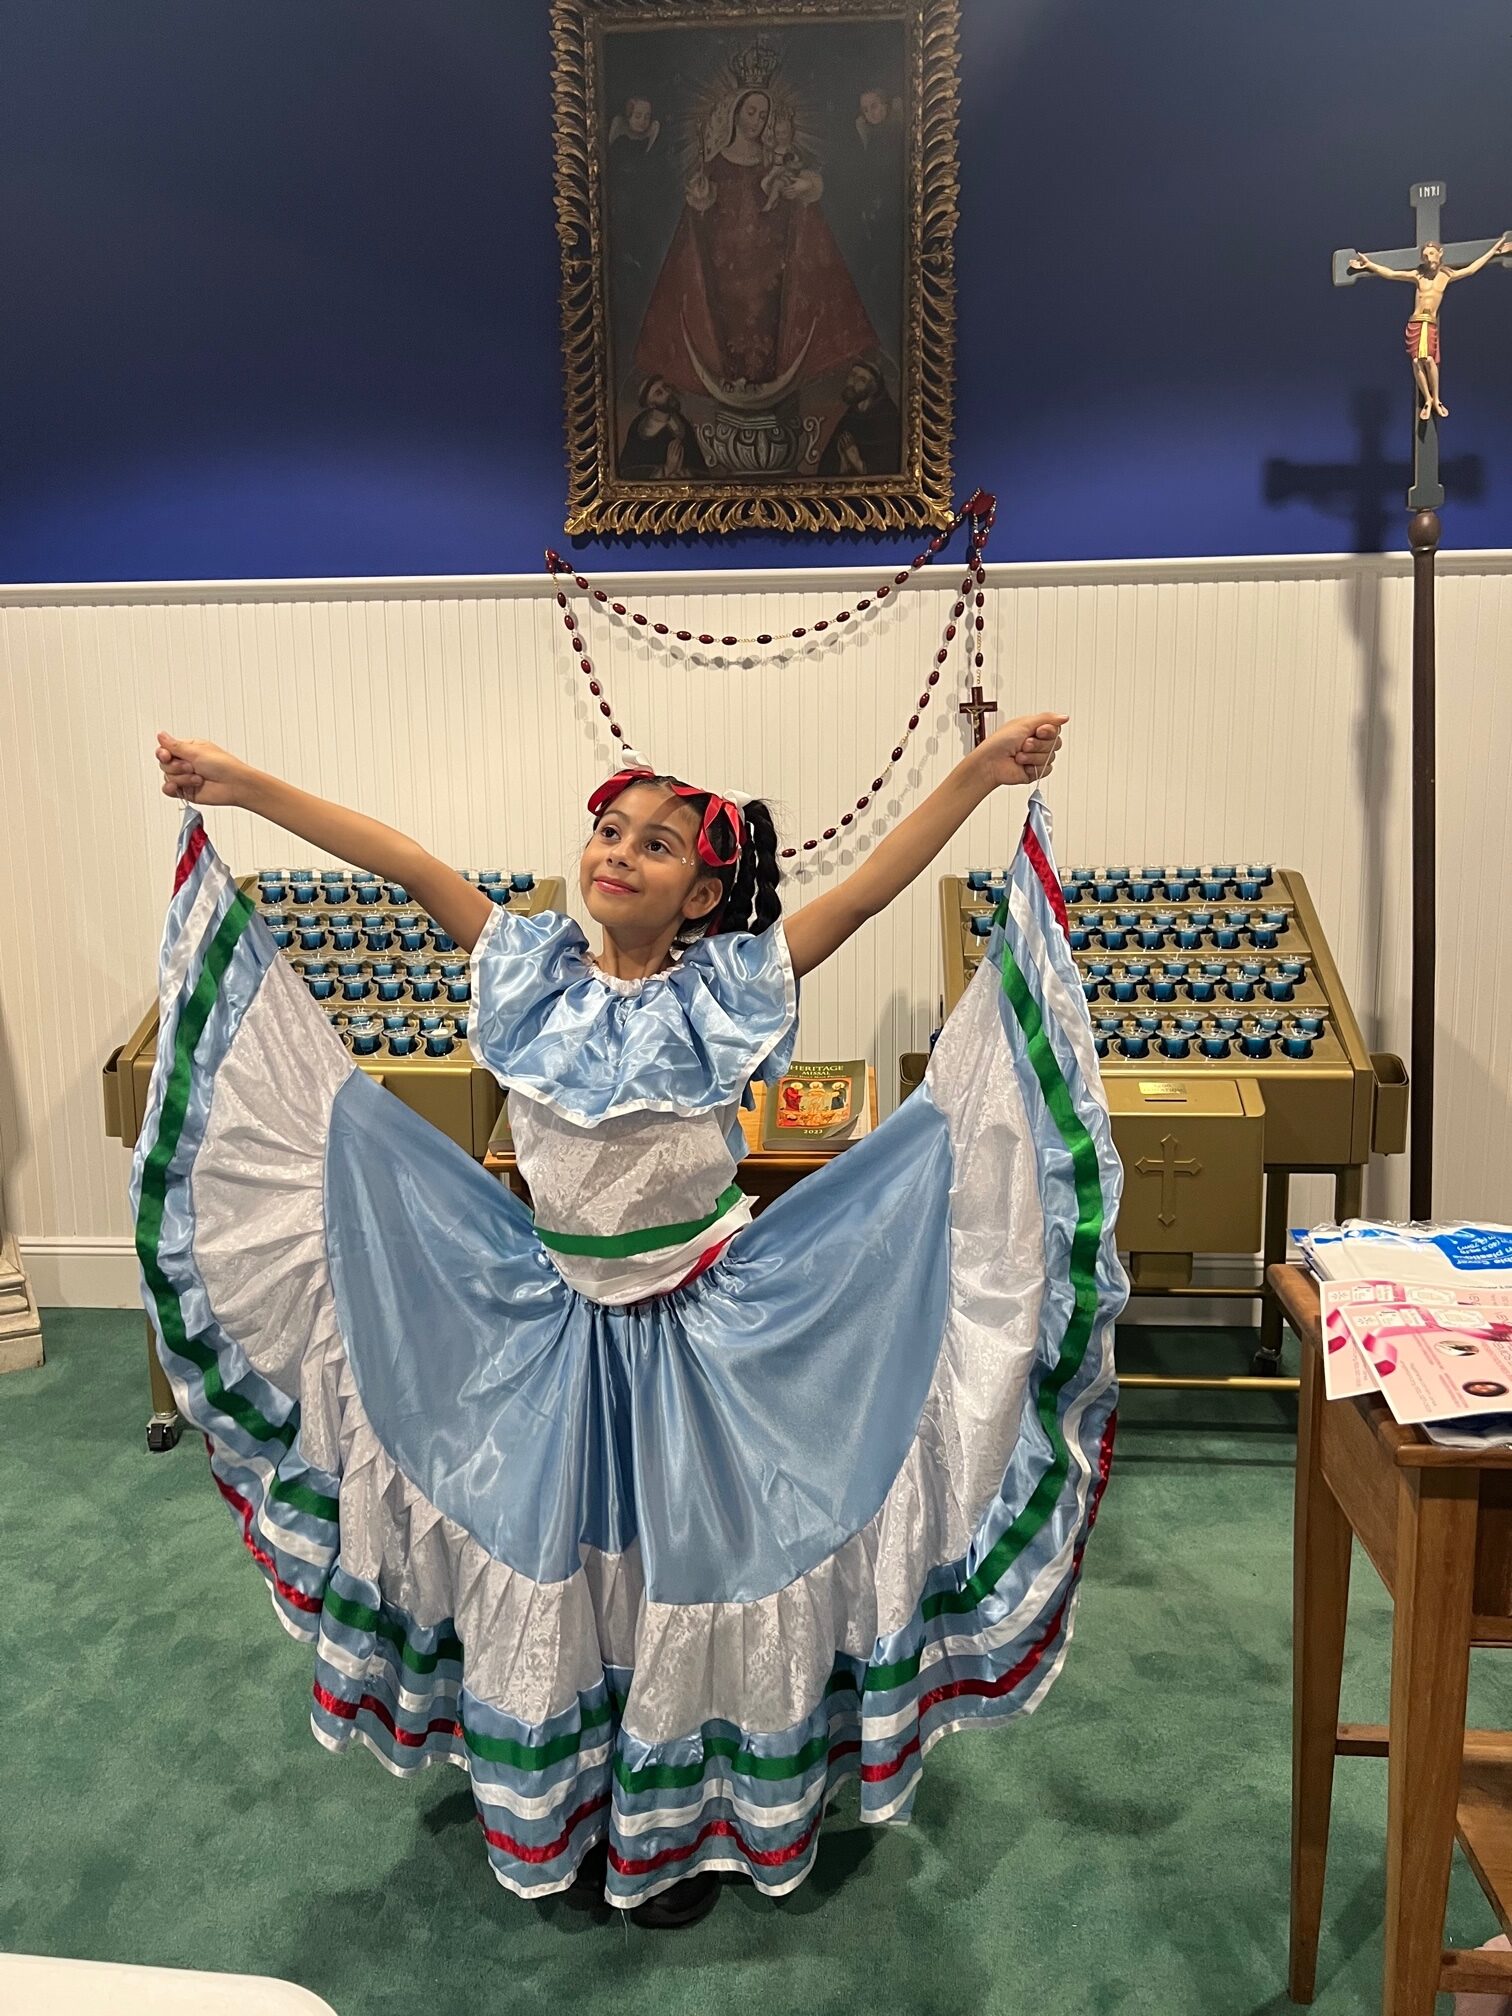 Our Lady of the Hamptons School third-grader Isabella Mellado performed a Hispanic national dance at the school recently. COURTESY OUT LADY OF THE HAMPTONS SCHOOL